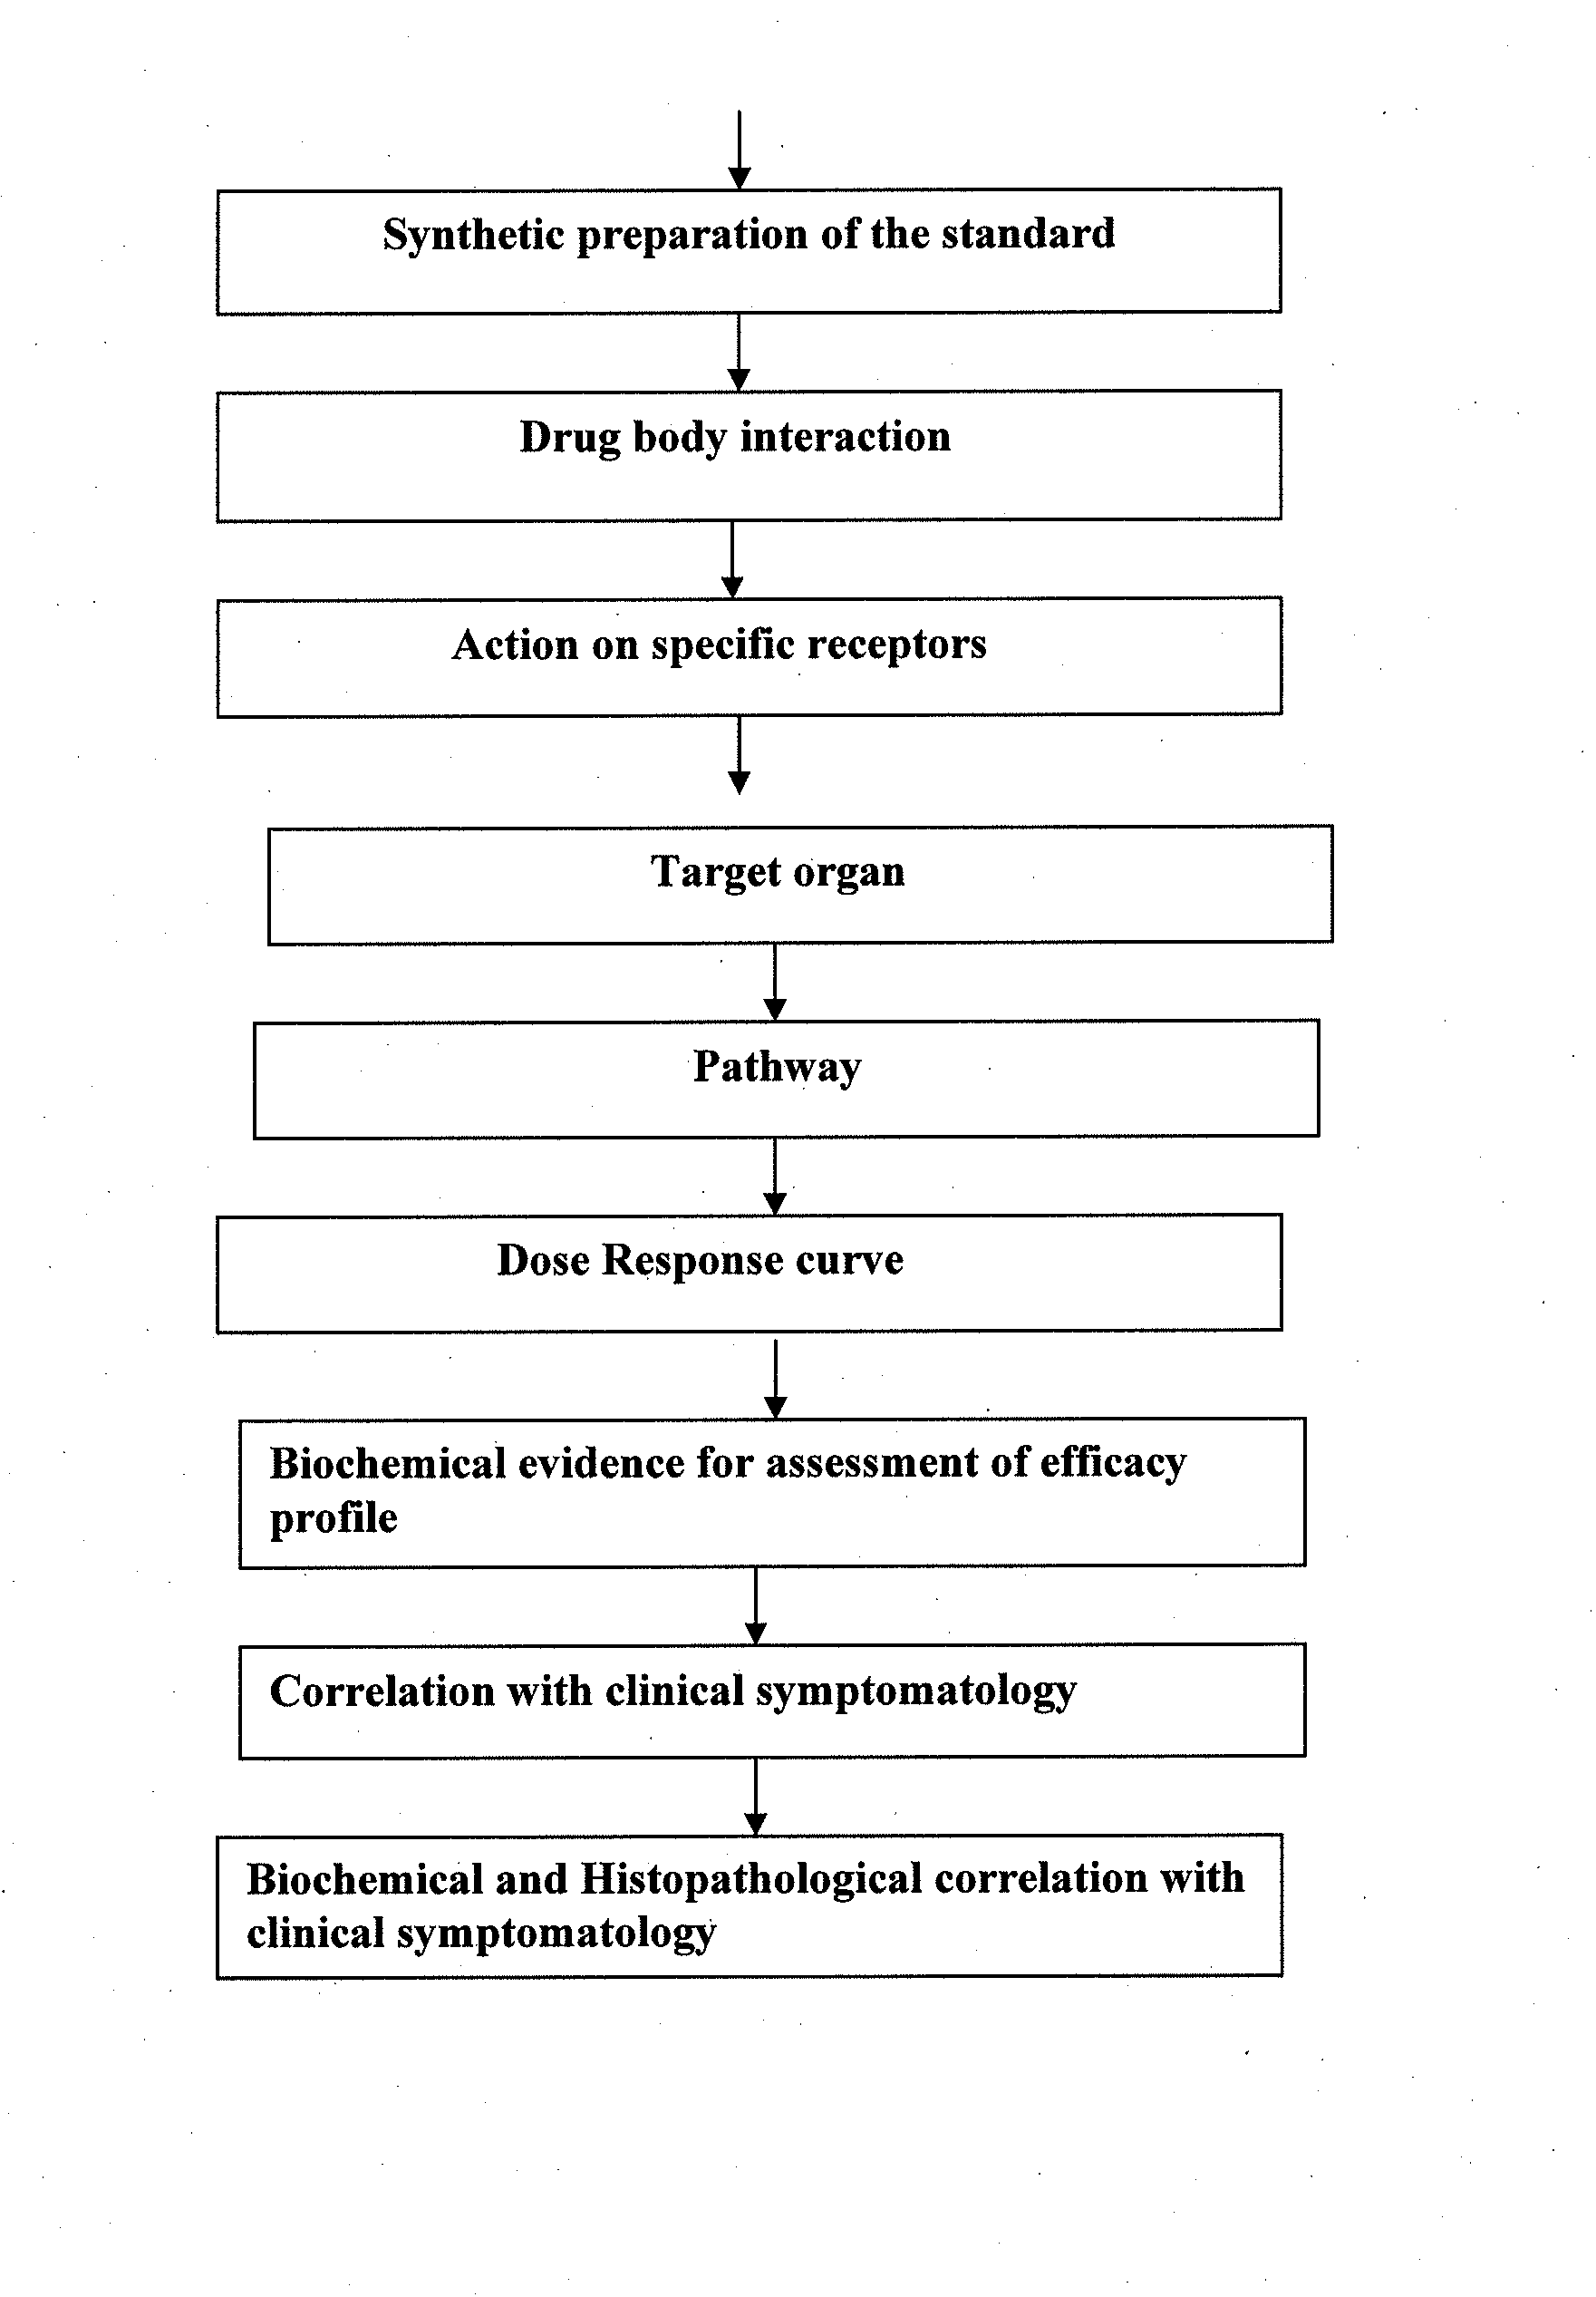 Novel herbal formulation for the modulation of immune system of HIV infected patients and a process of preparation thereof